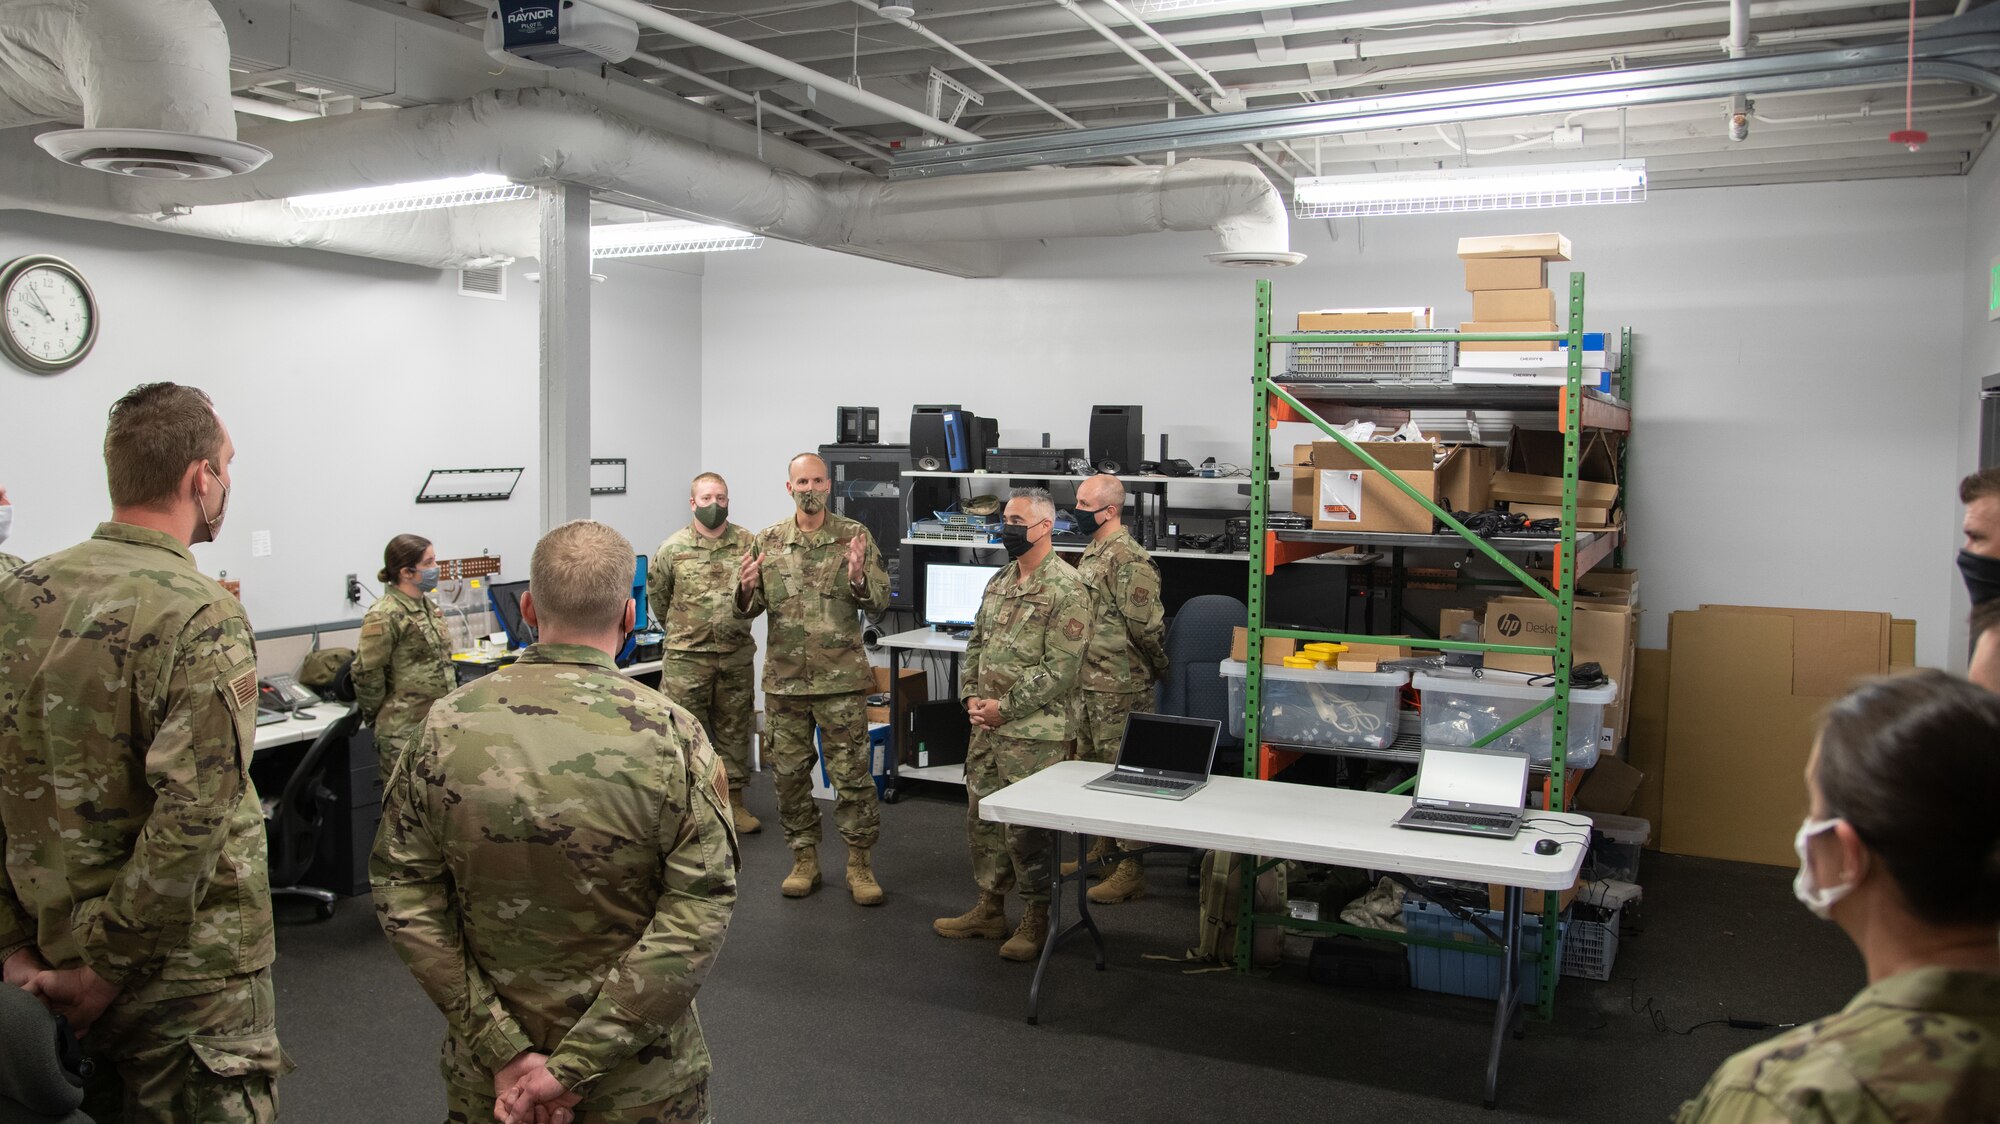 The 302nd Airlift Wing commander speaks to a group of Airmen from the 302nd Communications Flight surrounded by equipment in a room.